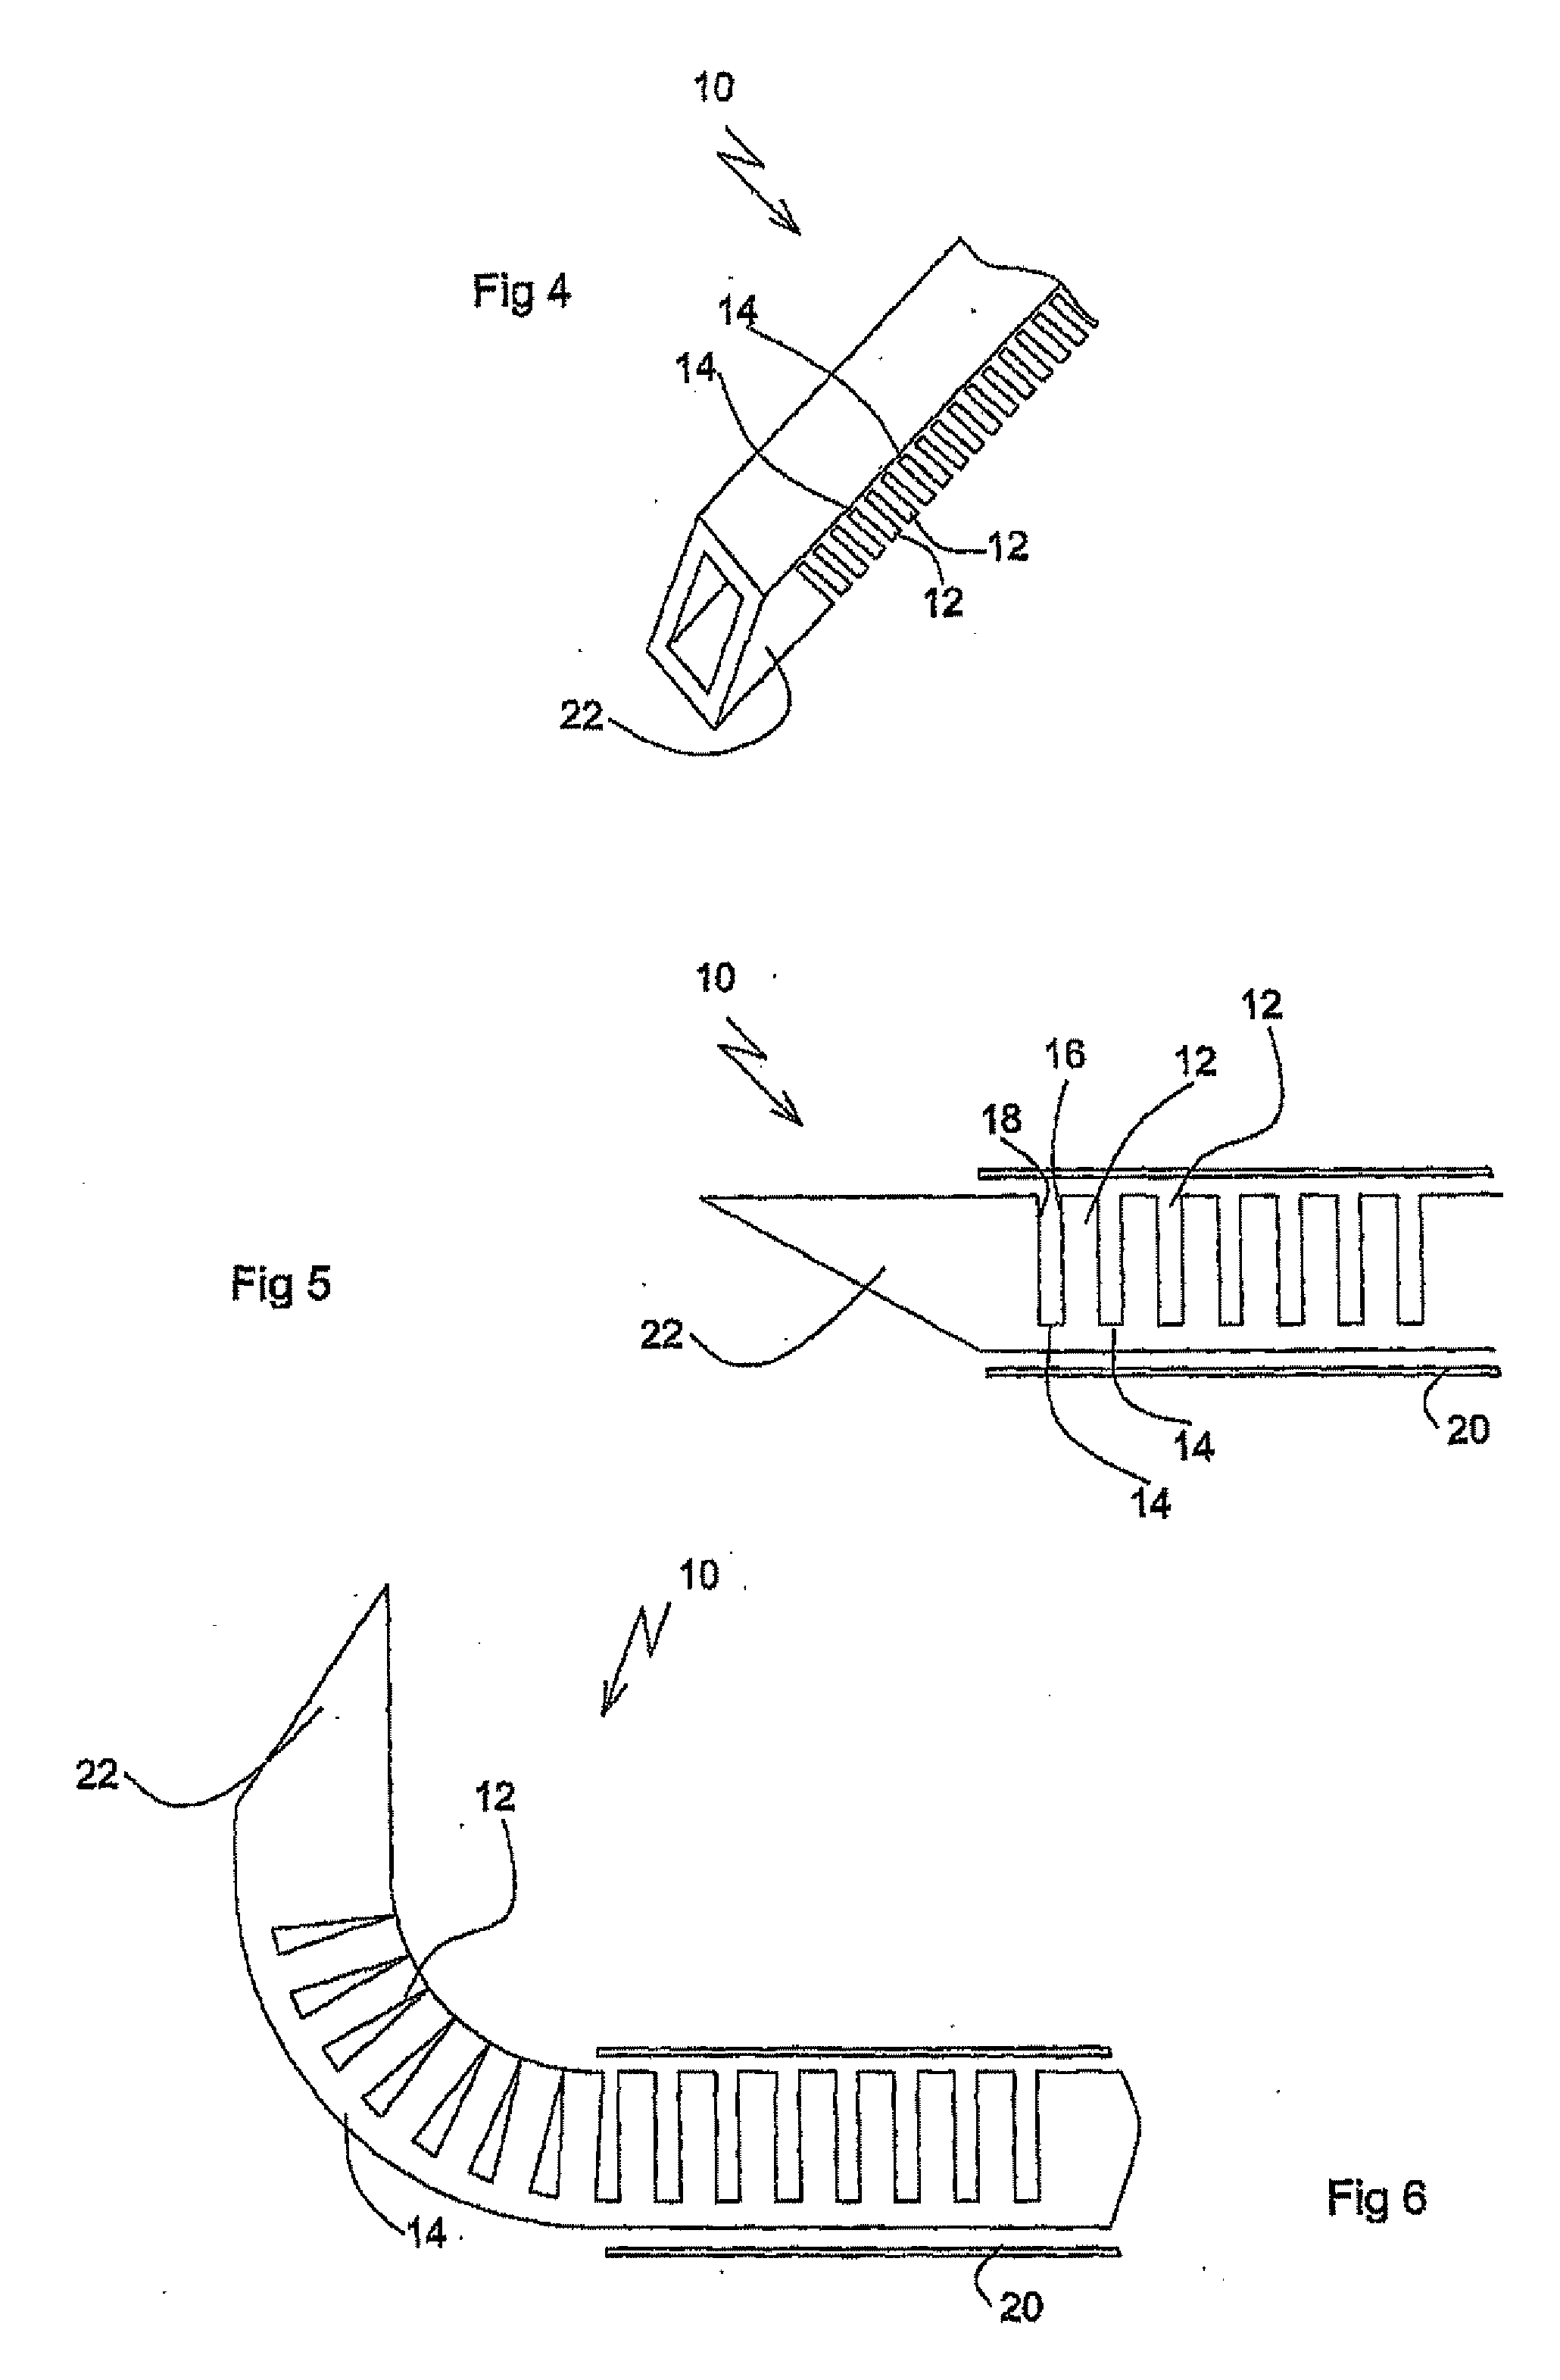 Devices For Introduction Into A Body Via A Substantially Straight Conduit To Form A Predefined Curved Configuration, And Methods Employing Same